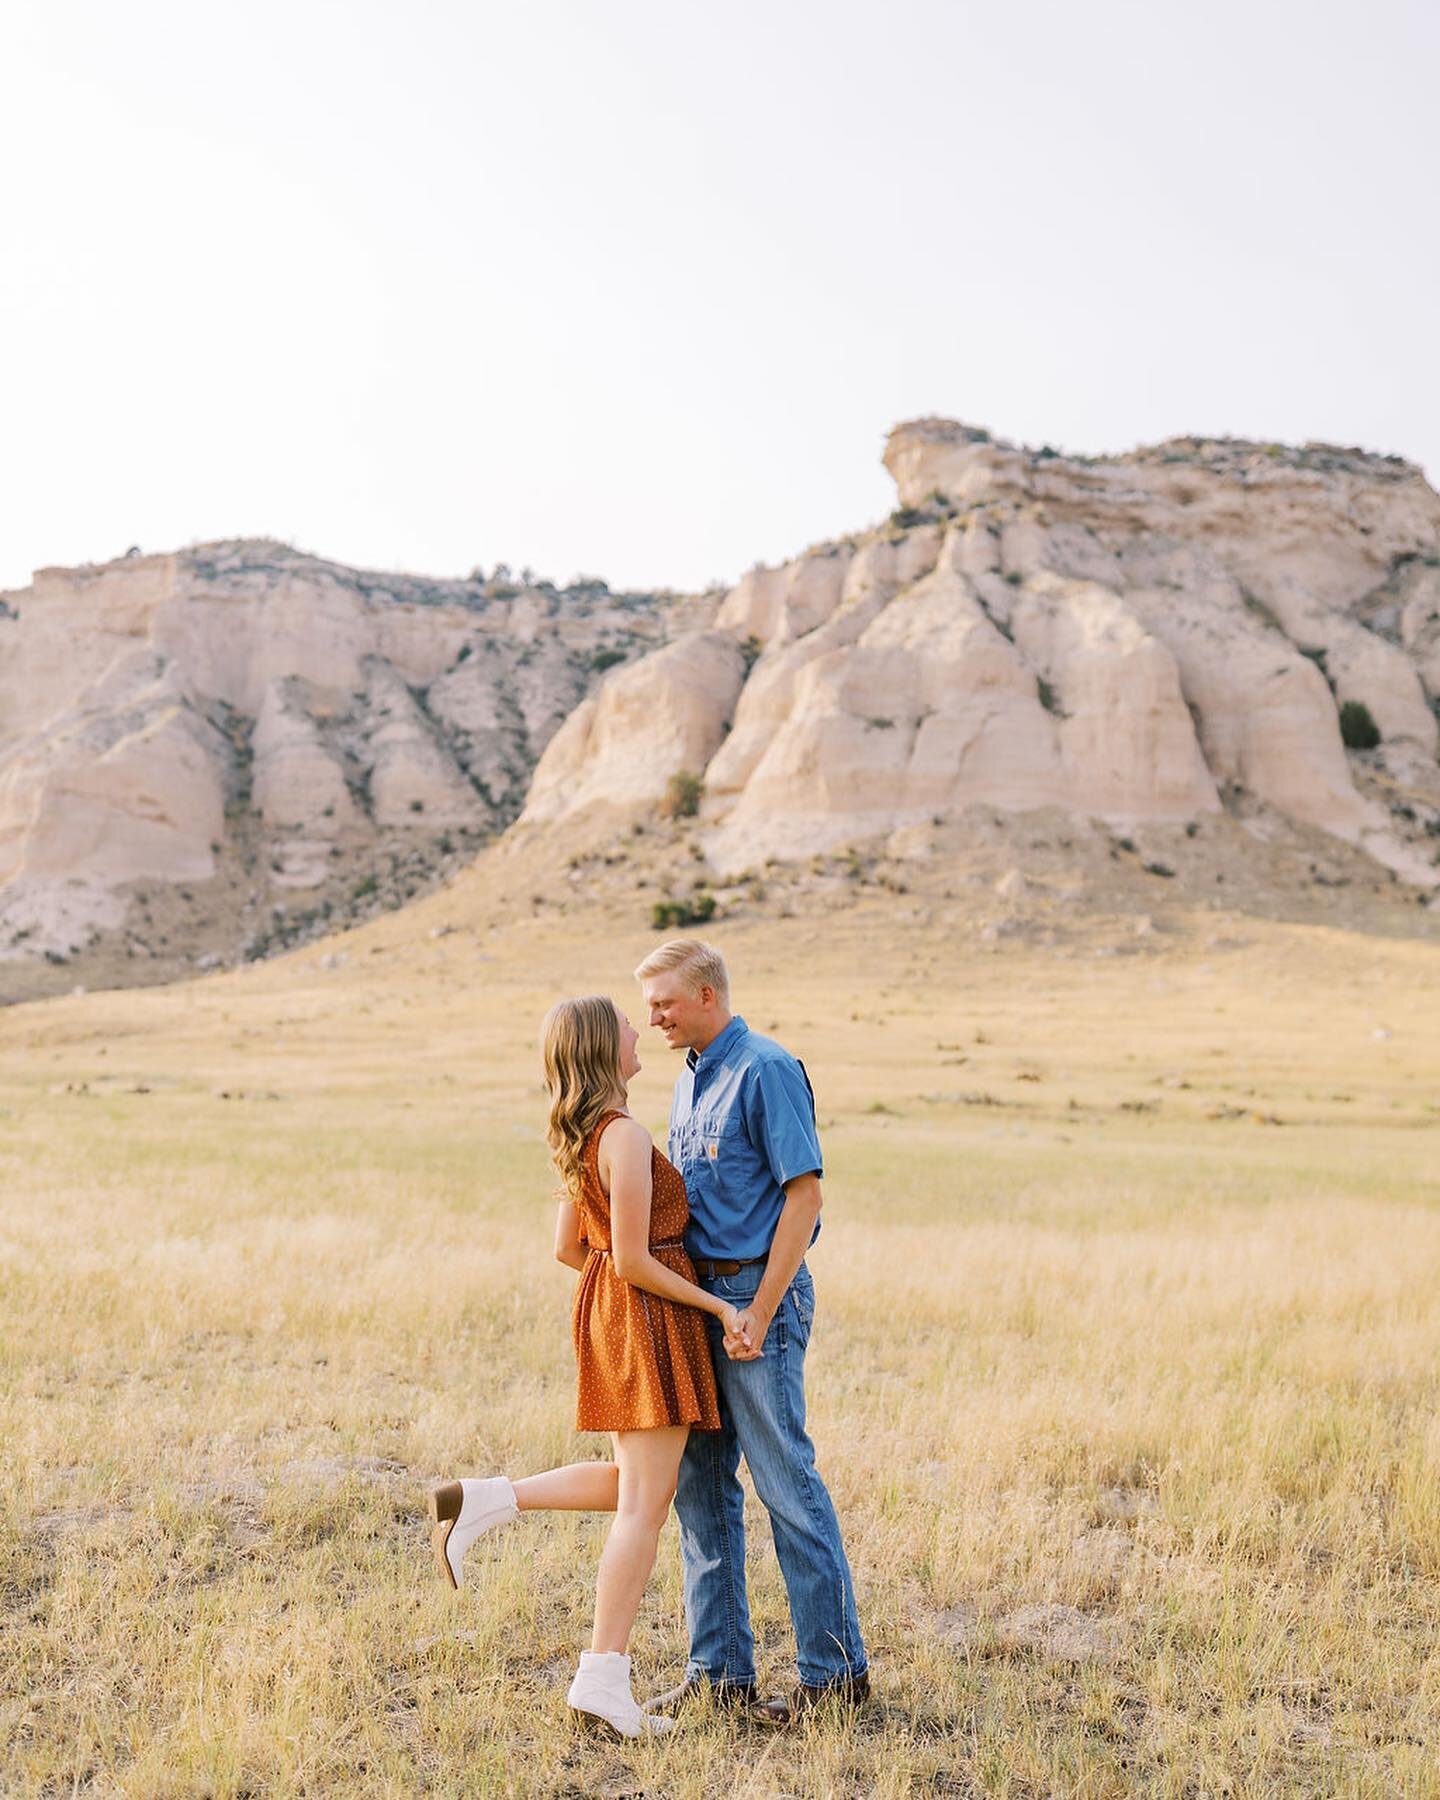 David + Christy engaged on the ranch (1/3)